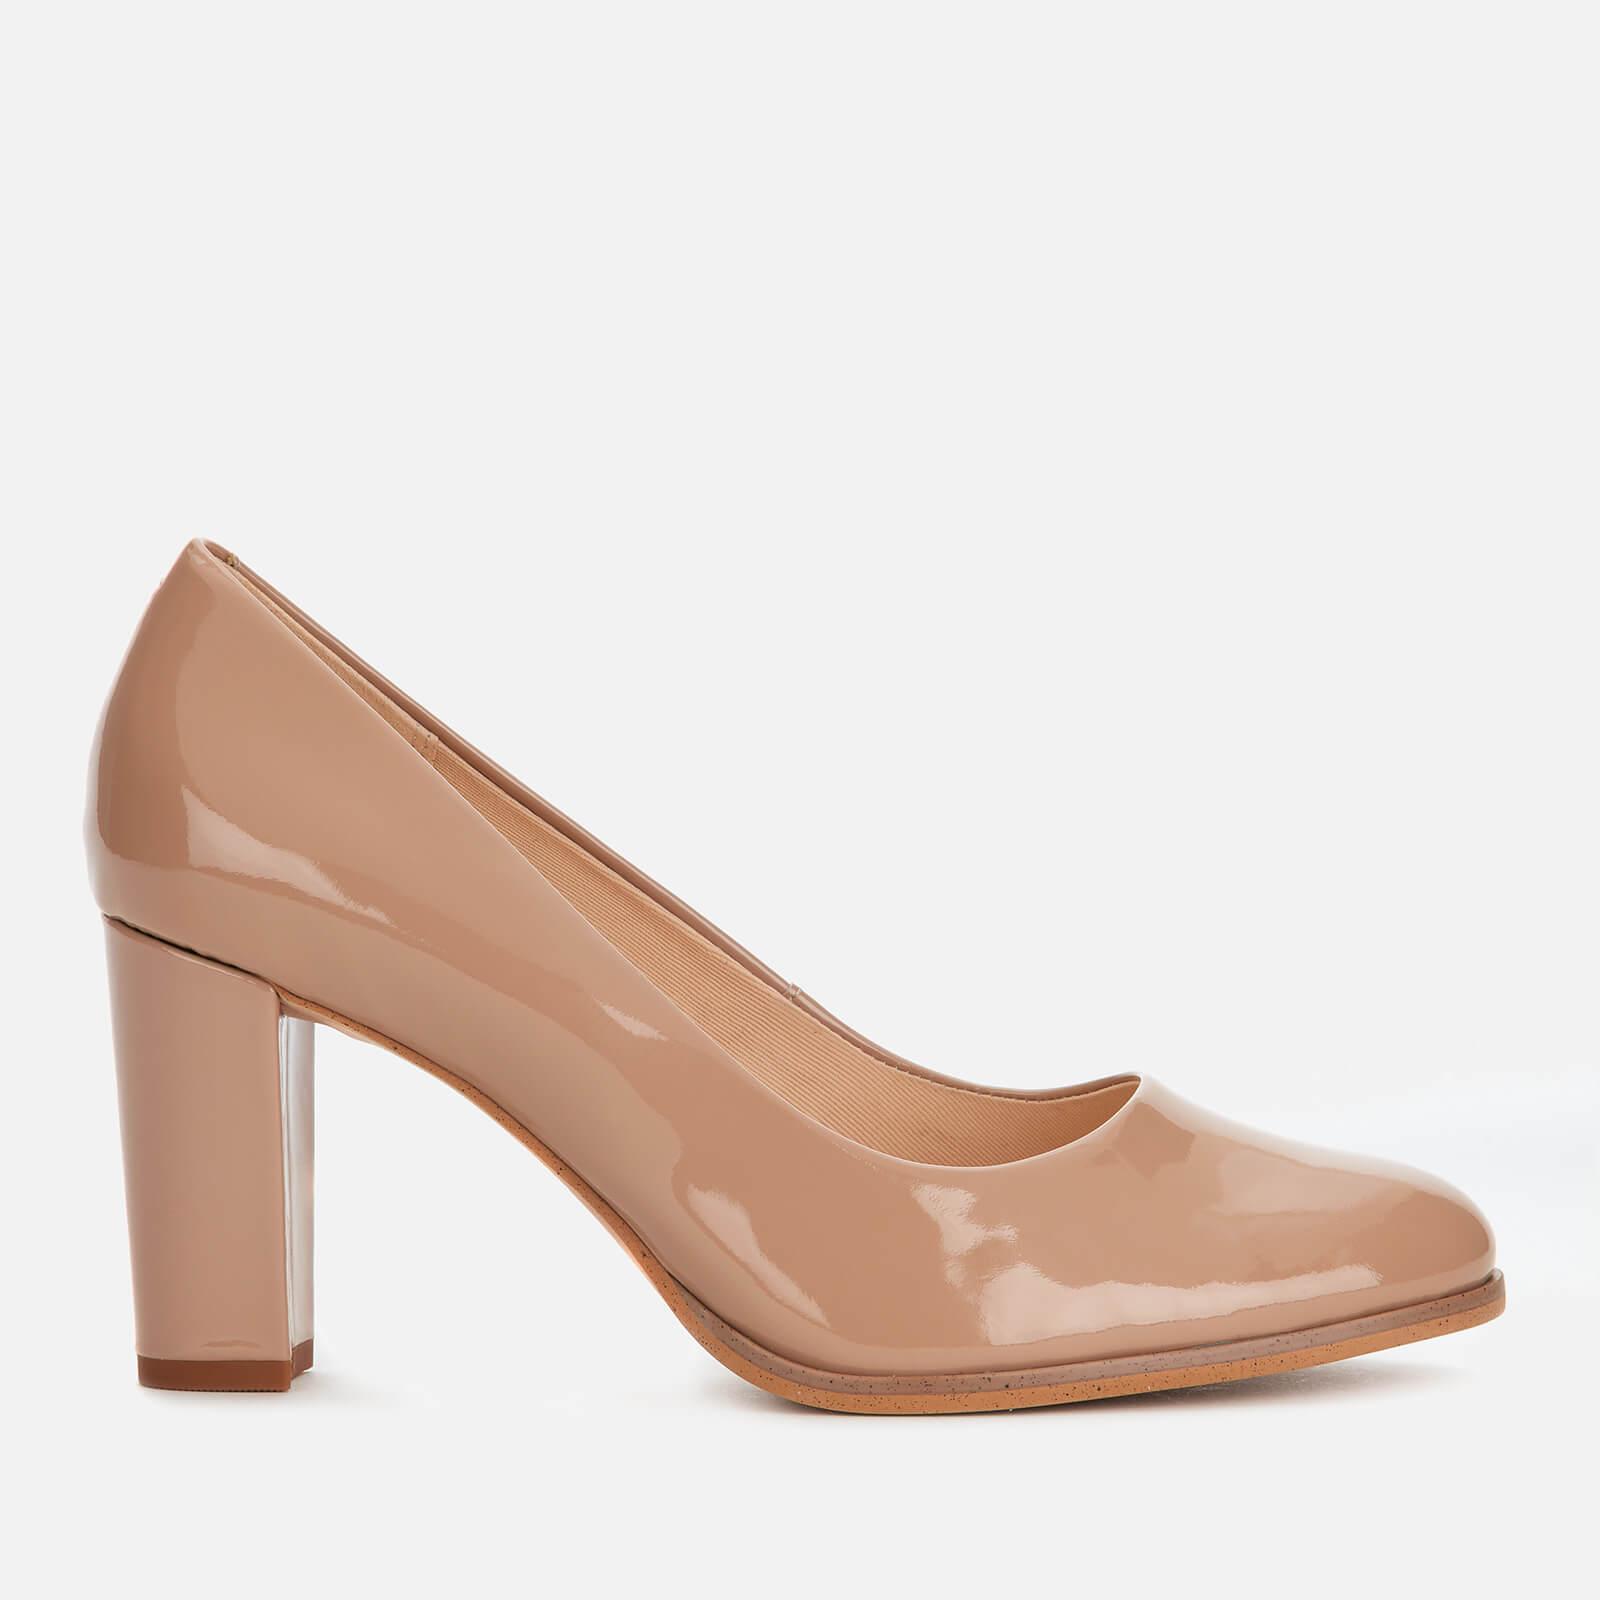 Clarks Leather Kaylin Cara Patent Court Shoes in Nude (Natural) - Lyst